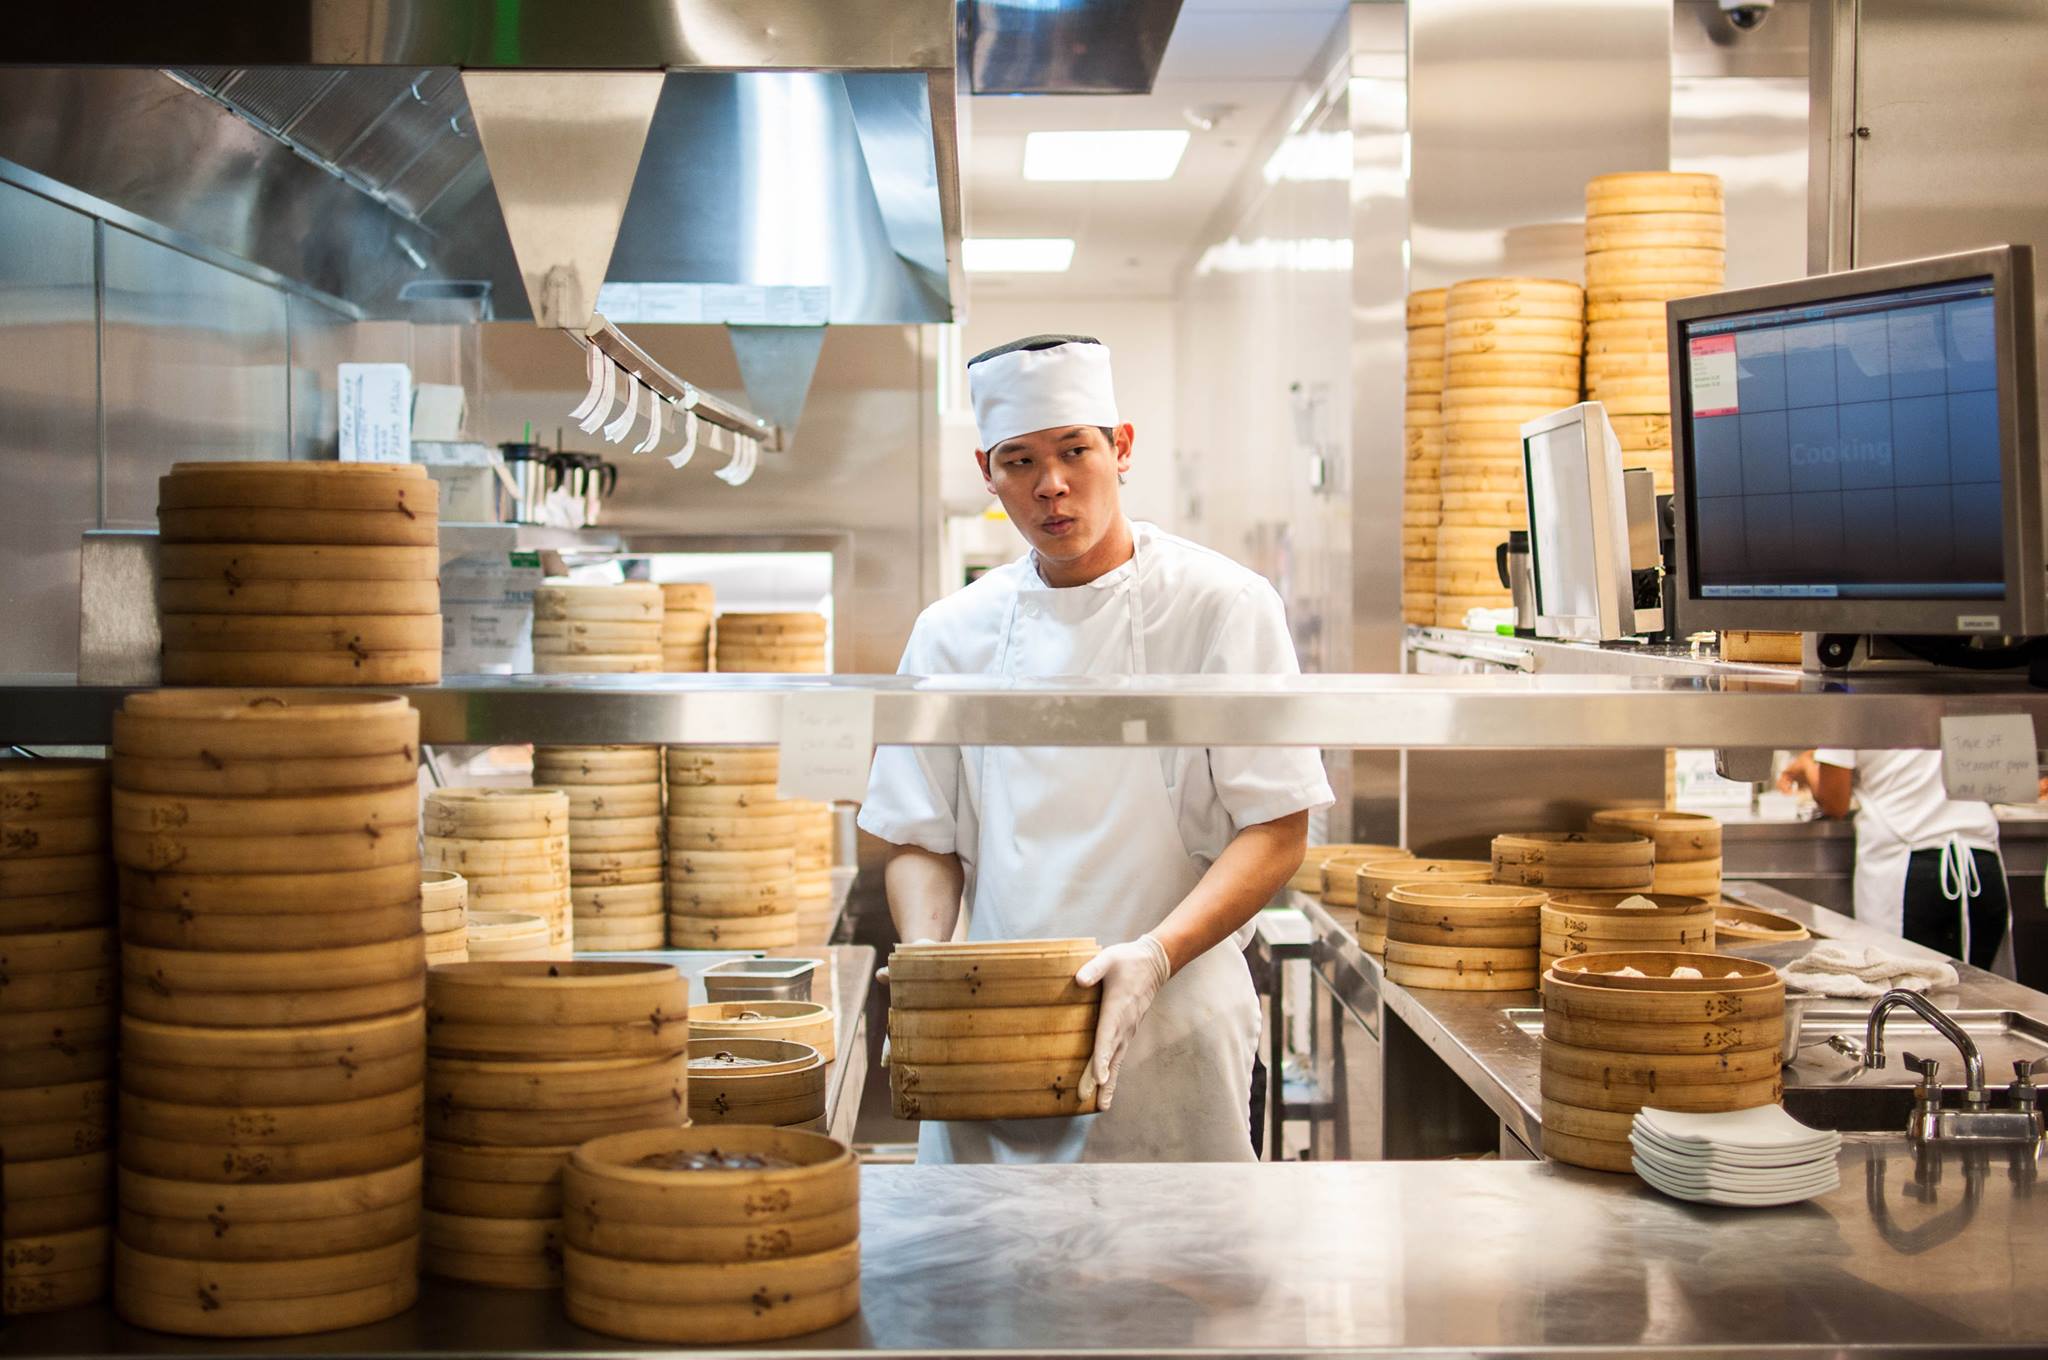 6 must-try dishes you need to order at Din Tai Fung